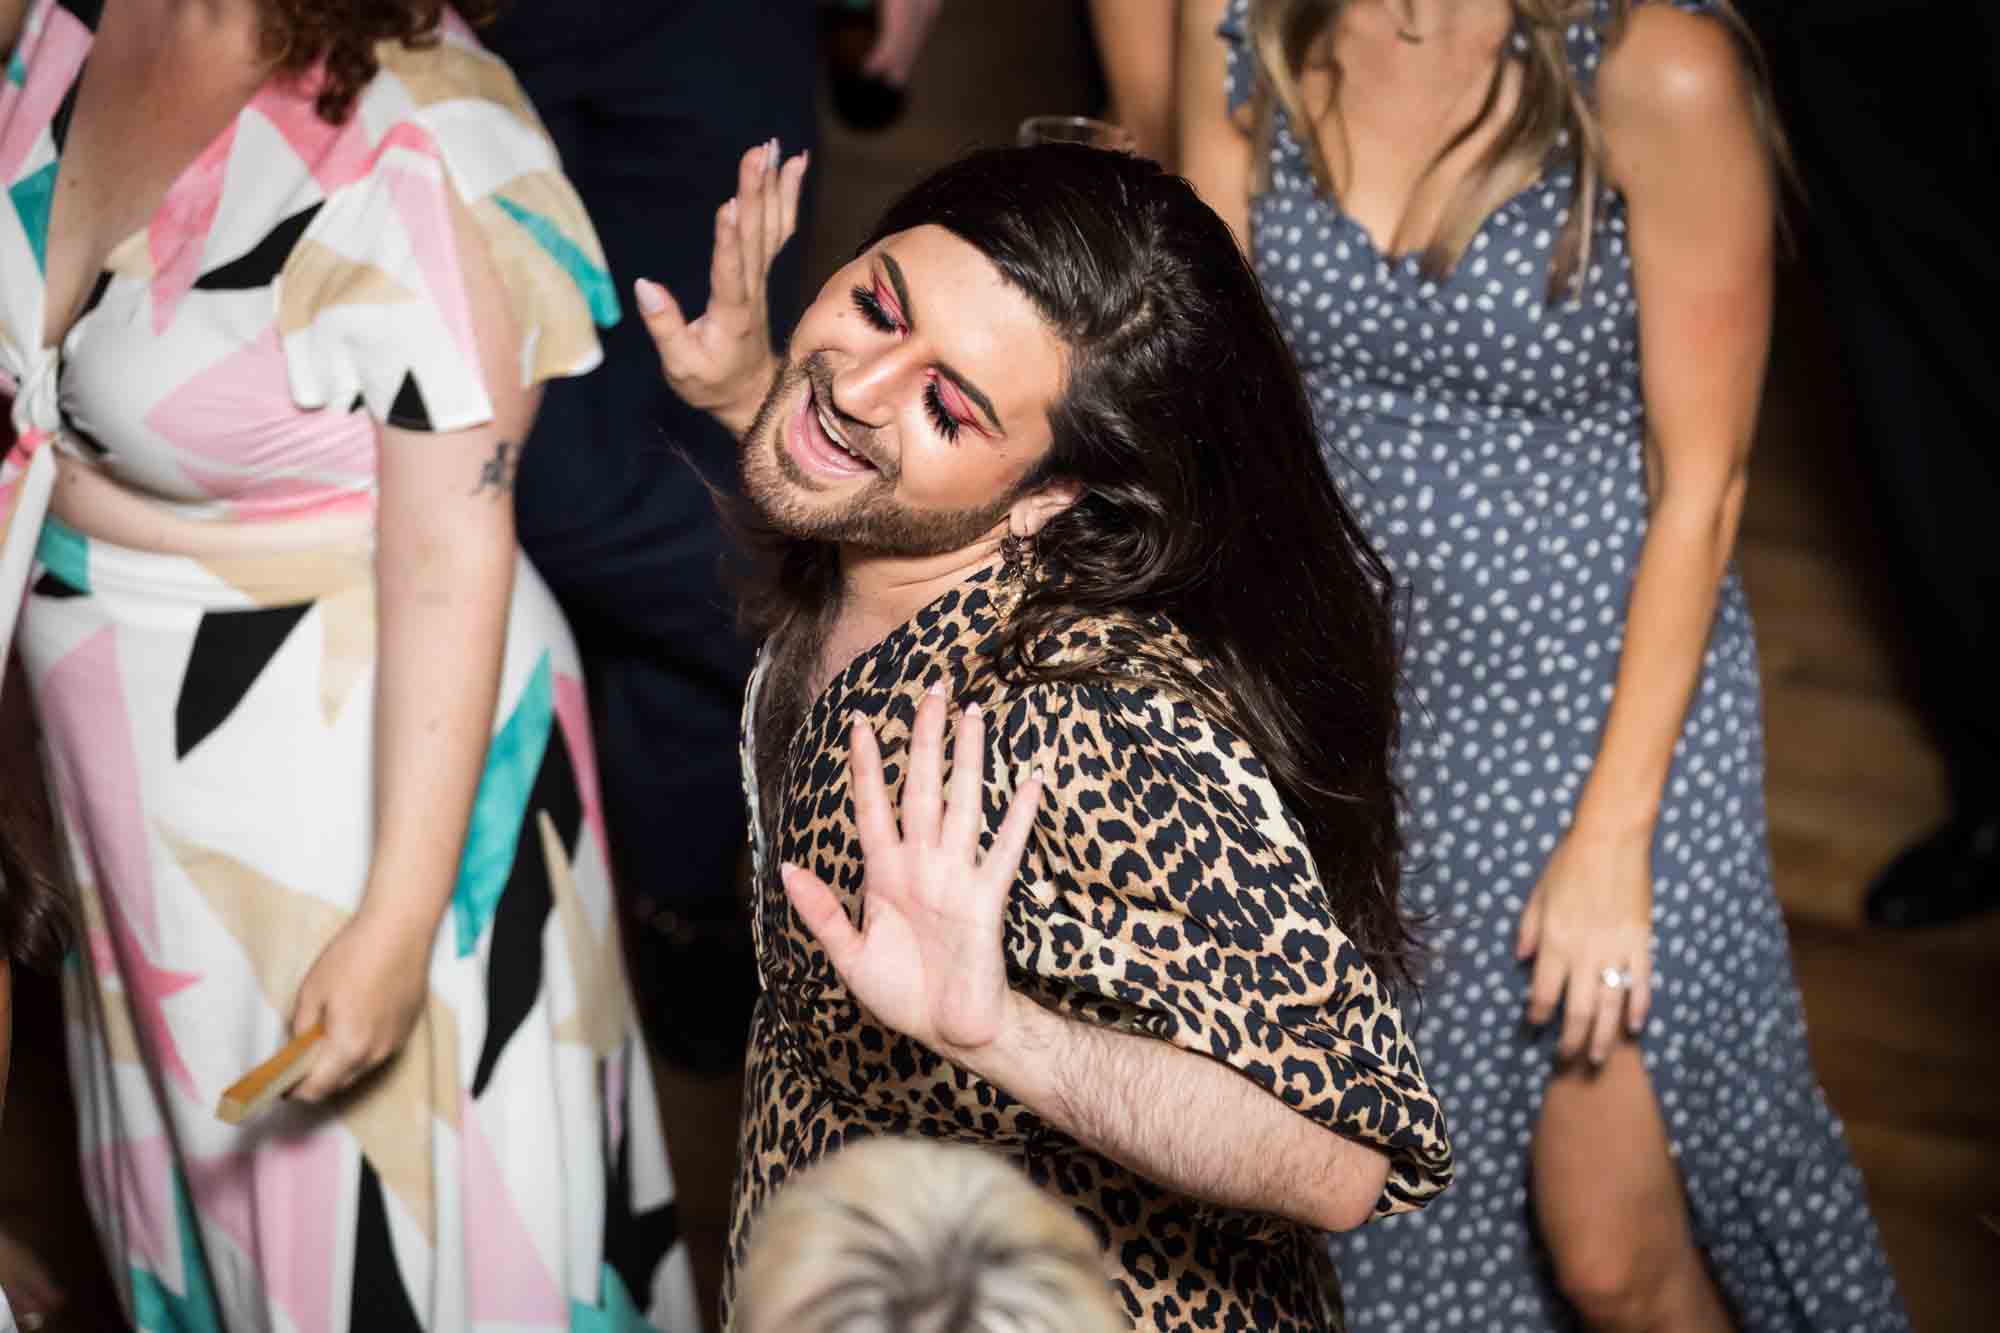 Man wearing eye shadow and a leopard dress dancing at a Housing Works wedding